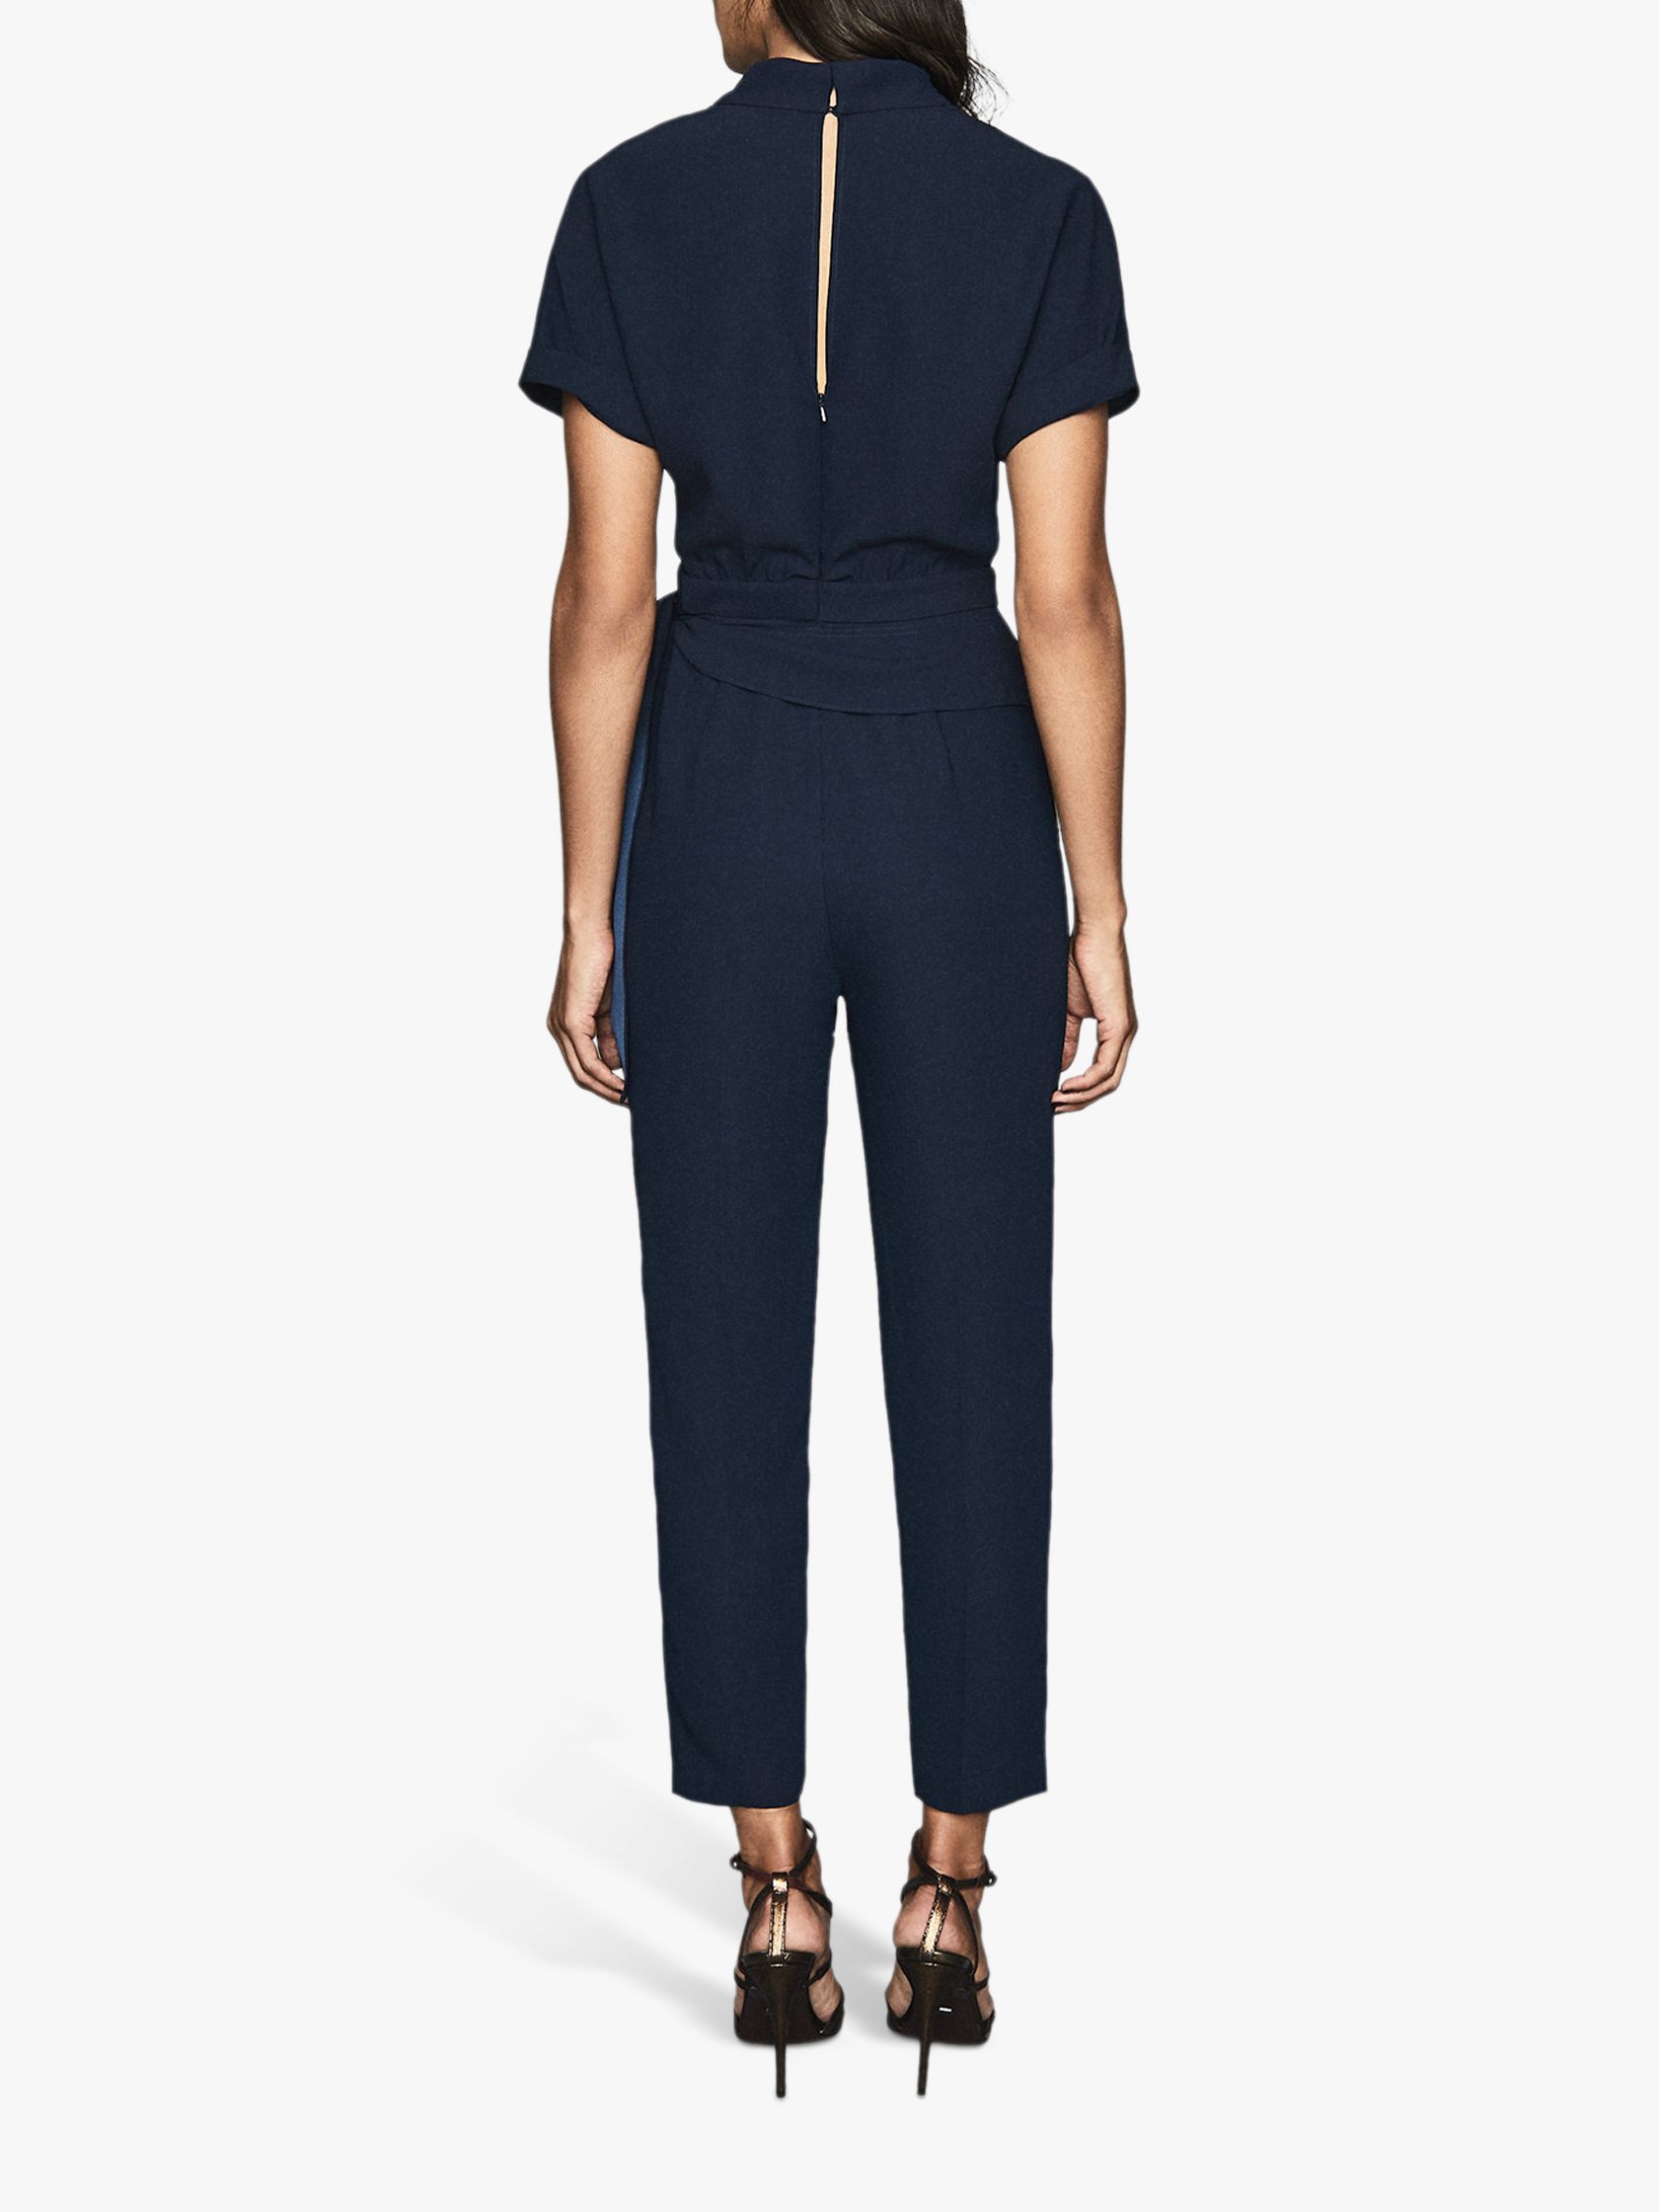 Reiss Silva Belted Jumpsuit, Navy at John Lewis & Partners